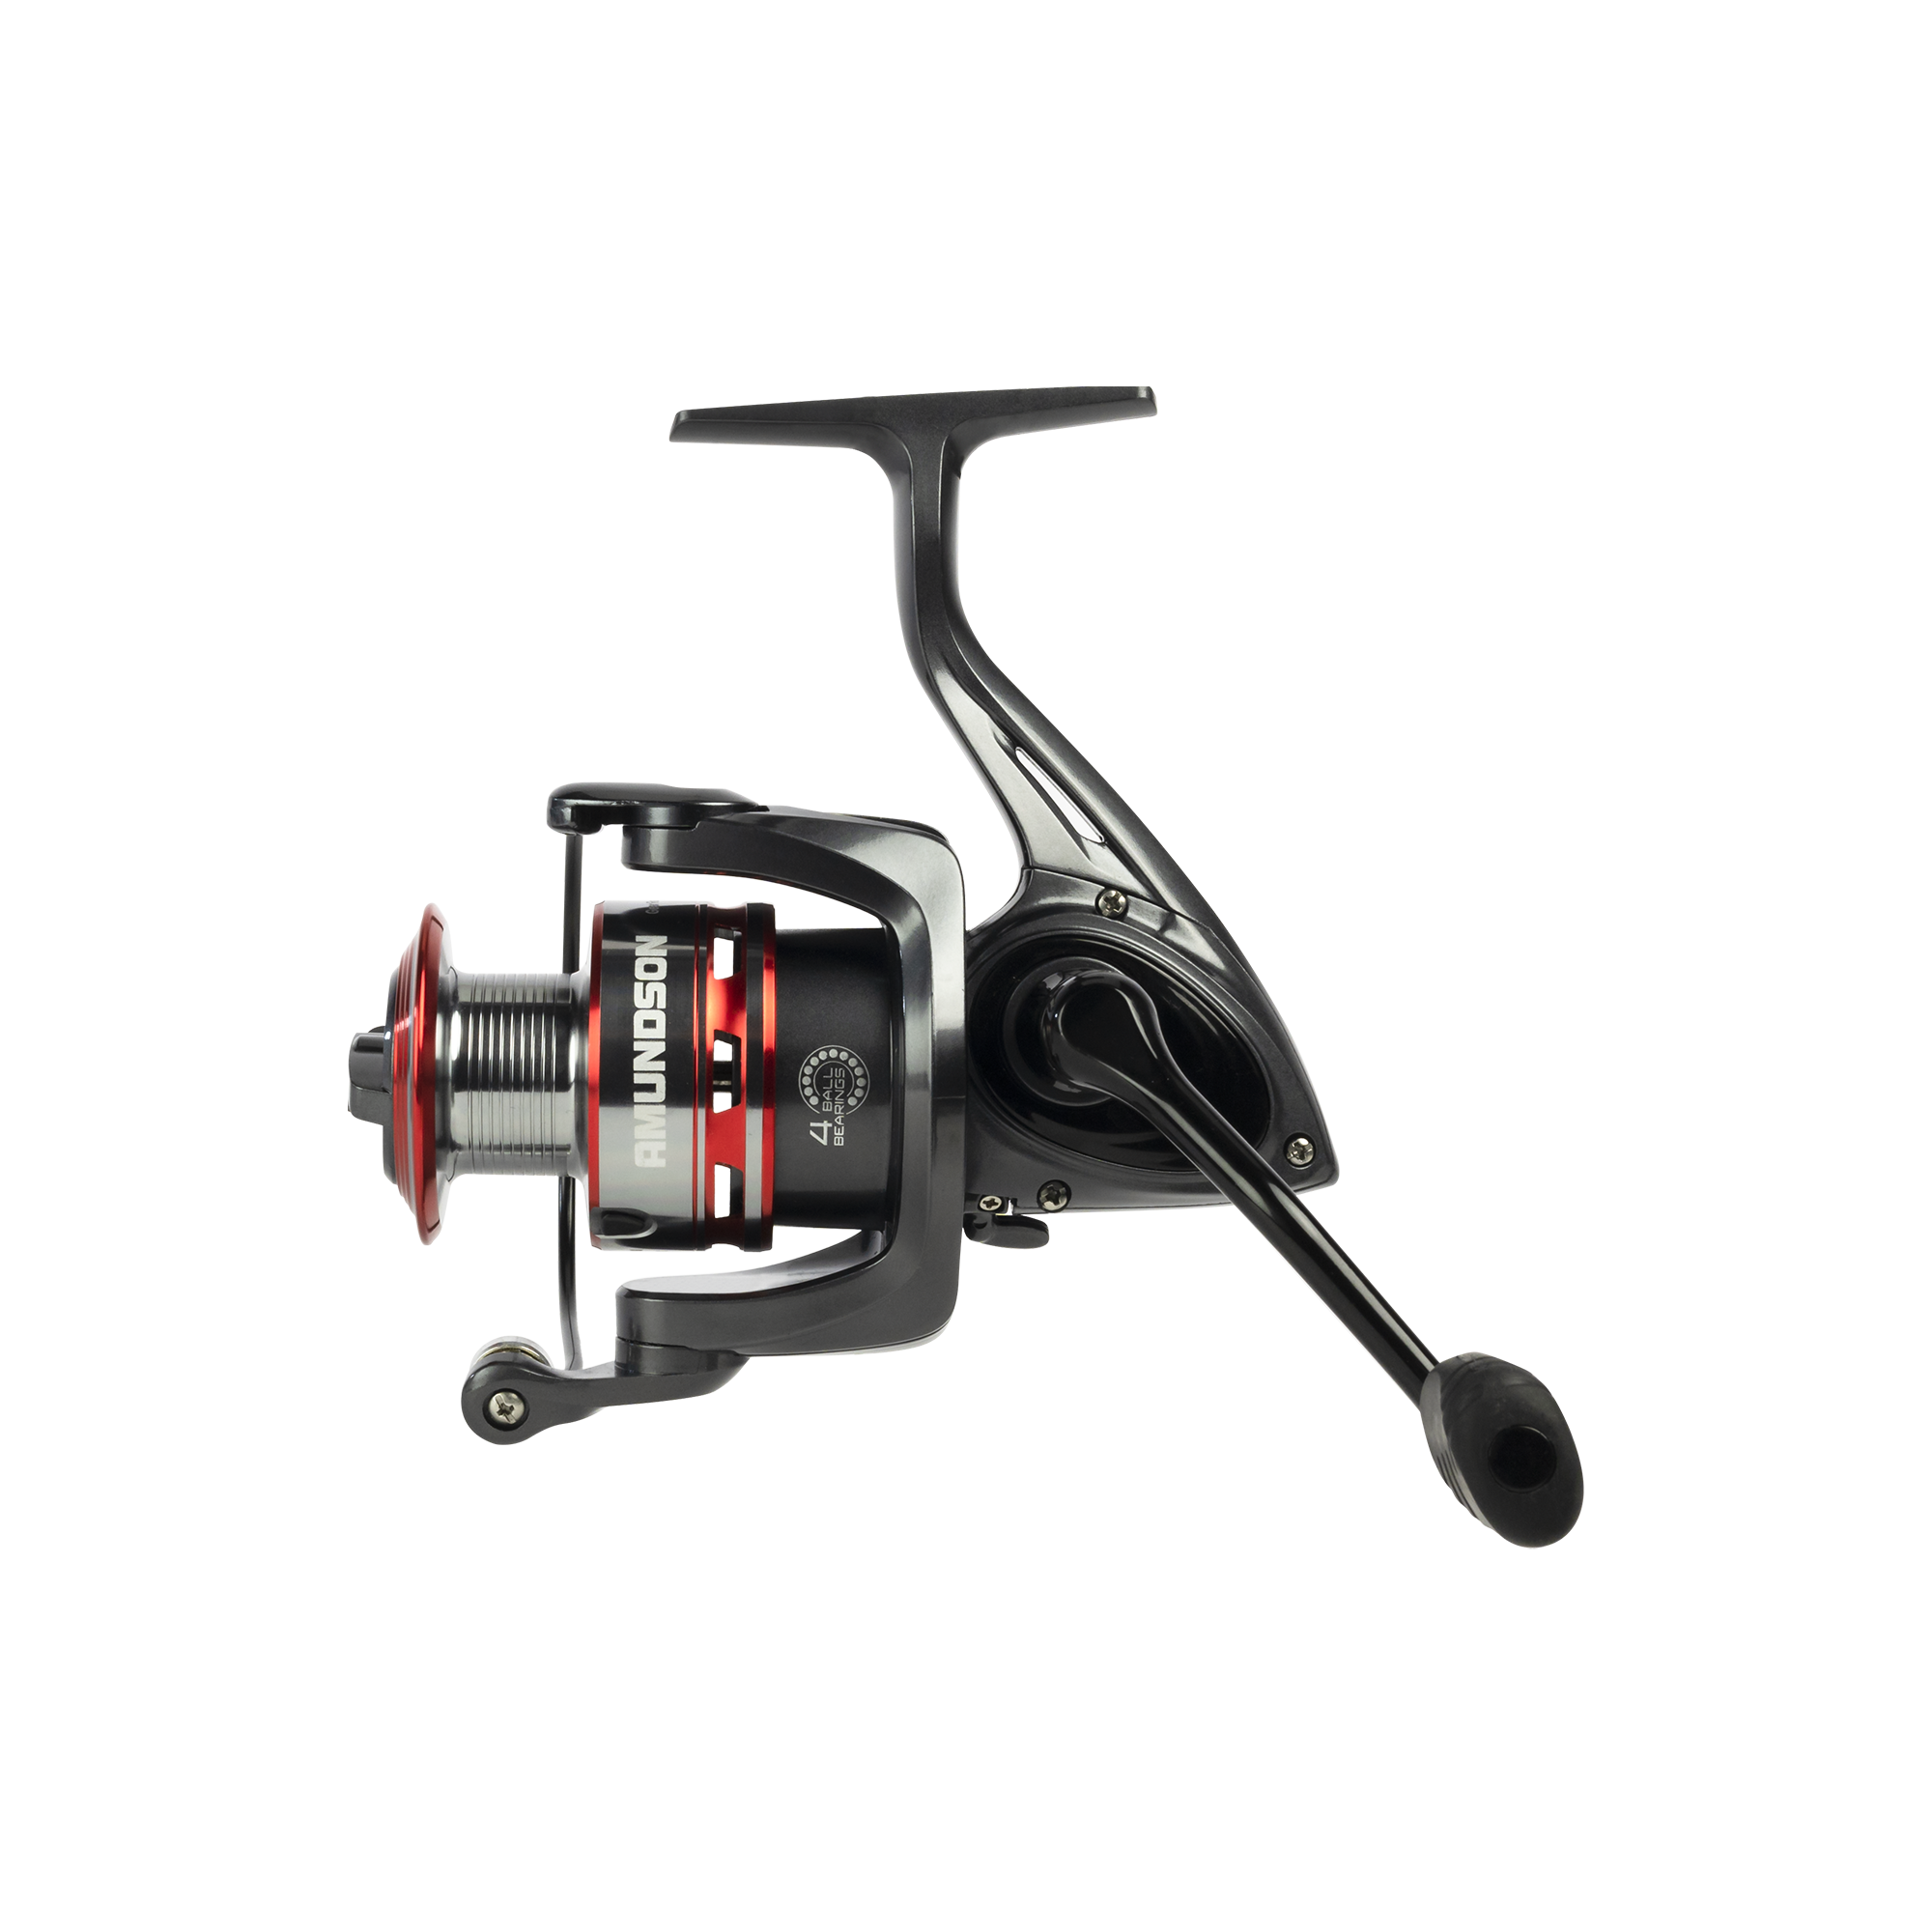 Savvy Sumo X Spinning Reels